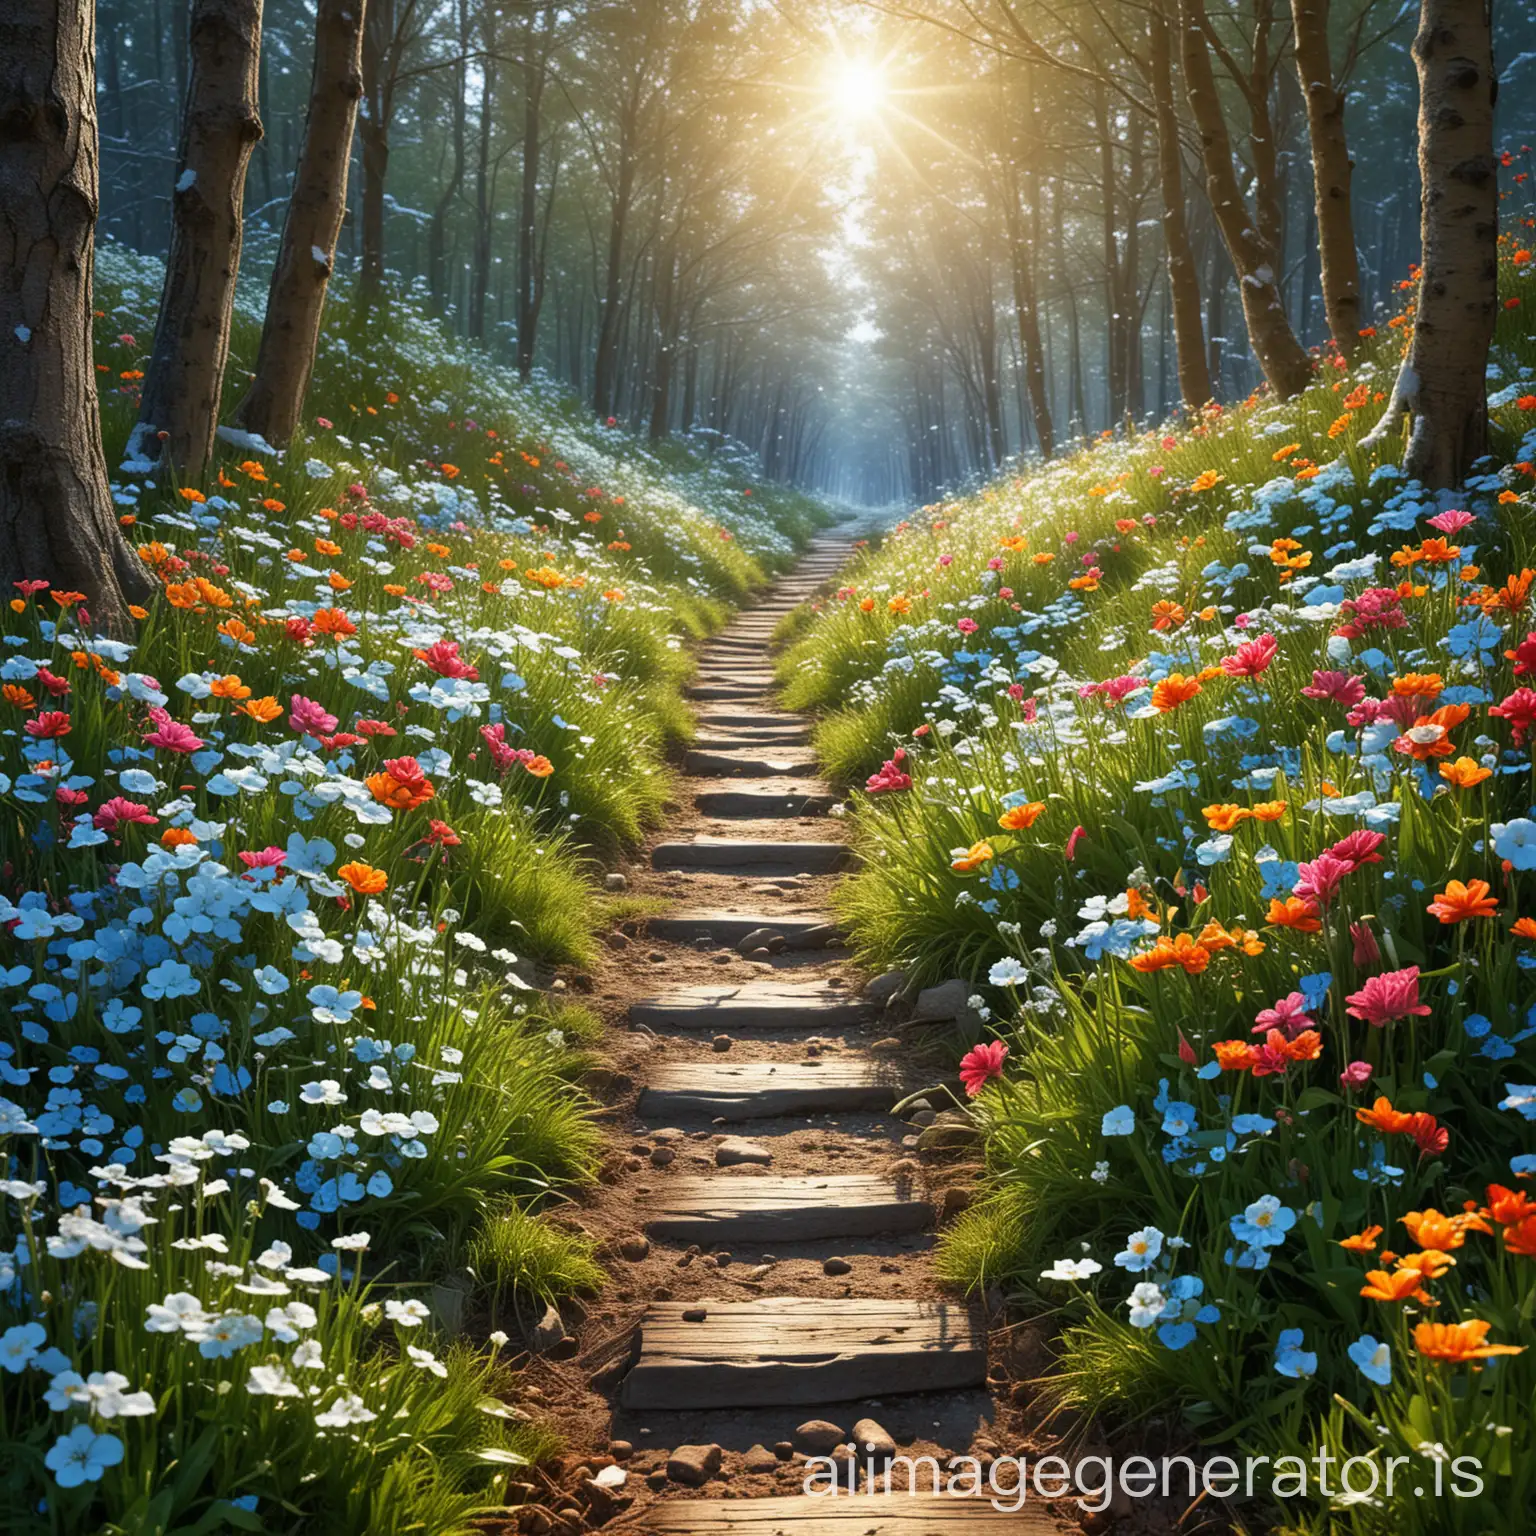 Enchanted-Forest-Path-Serene-Journey-through-Snow-and-Flowers